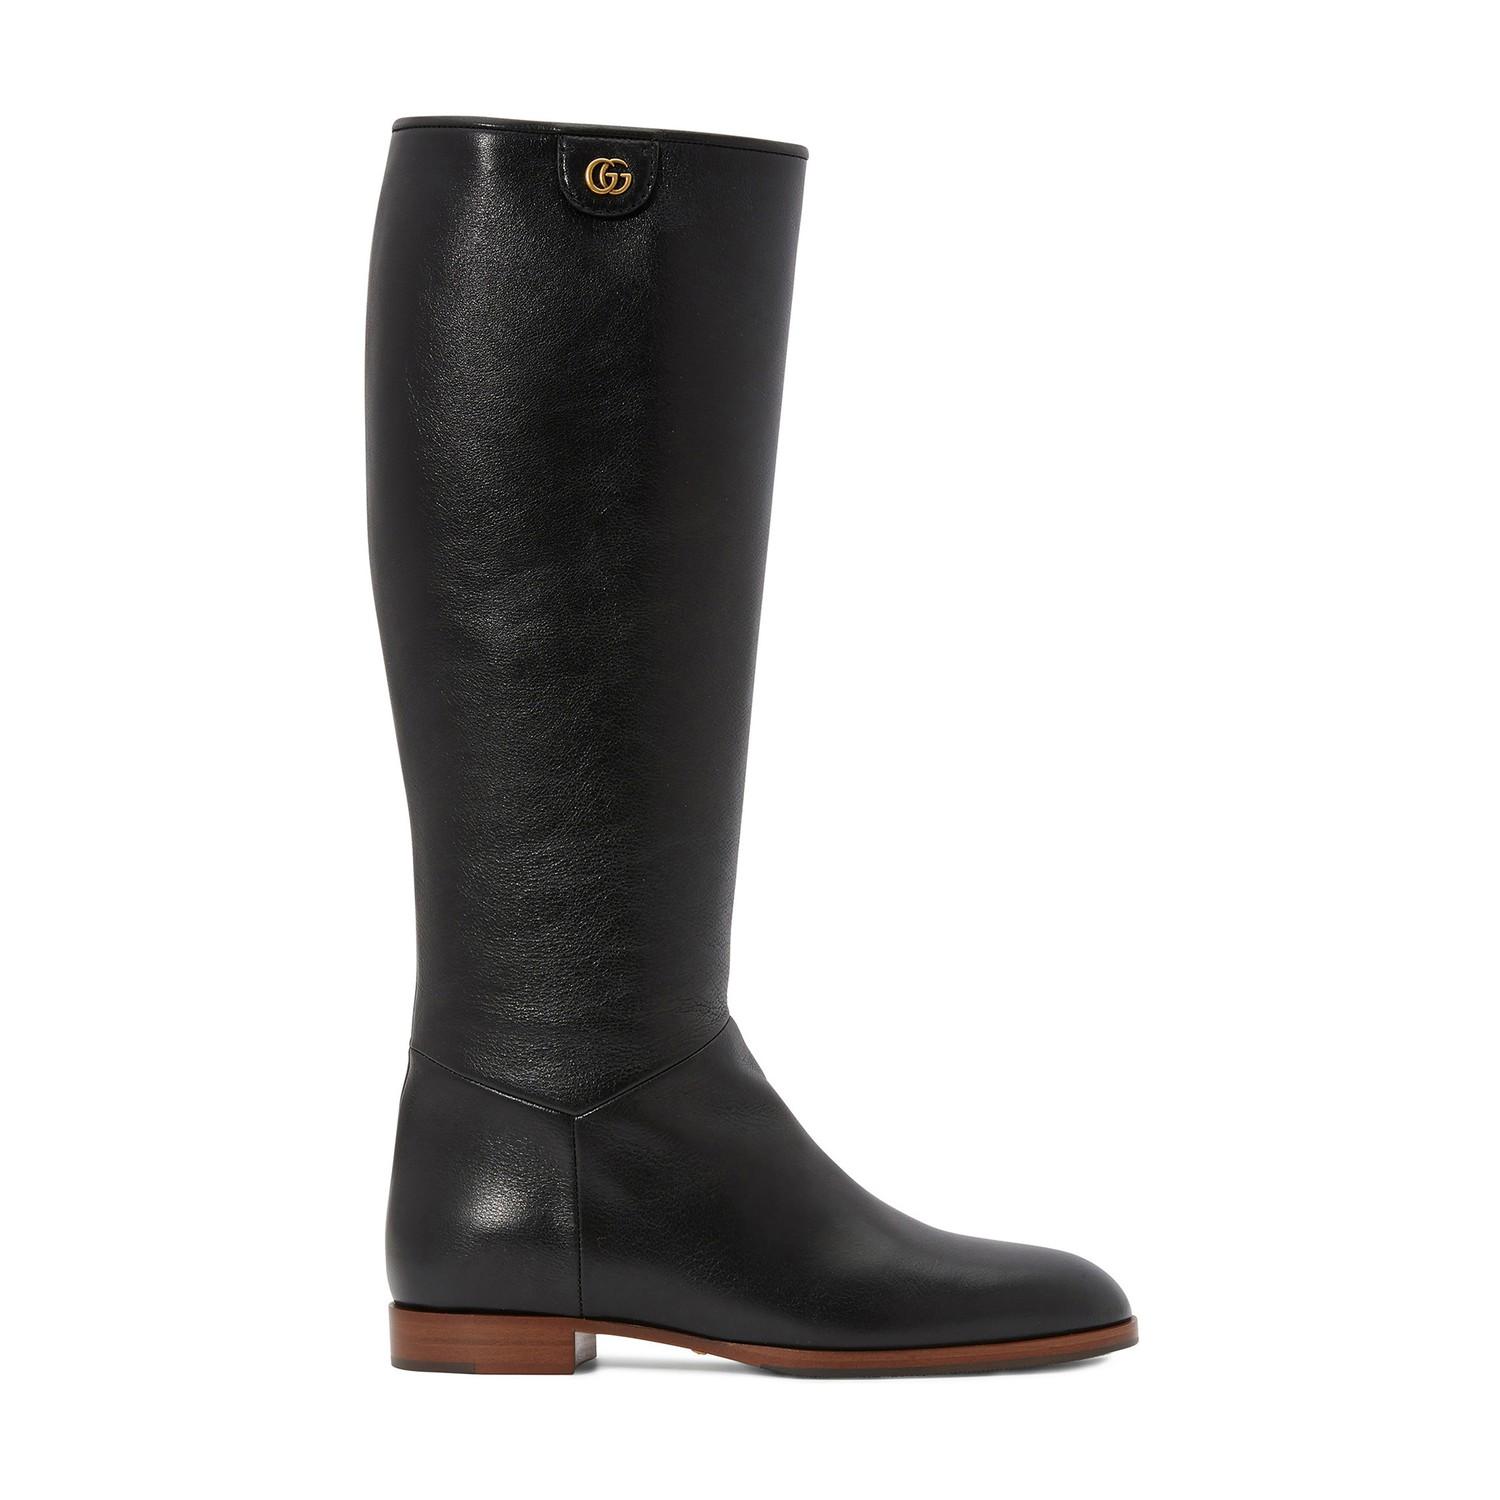 Gucci Rebelle Leather Boots in Black - Lyst